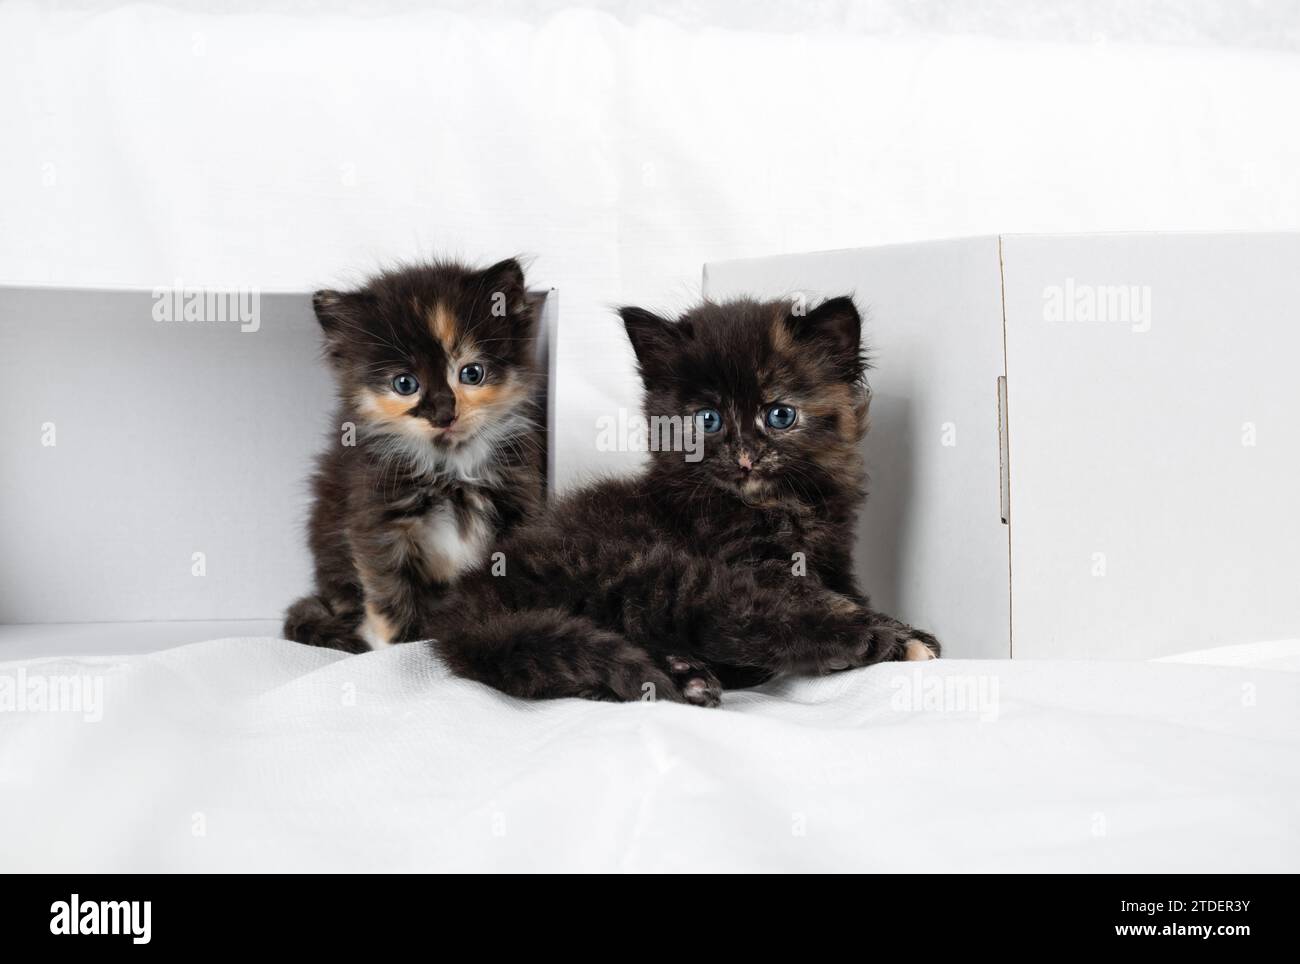 Two cute tortoiseshell kittens and white cardboard boxes. Stock Photo